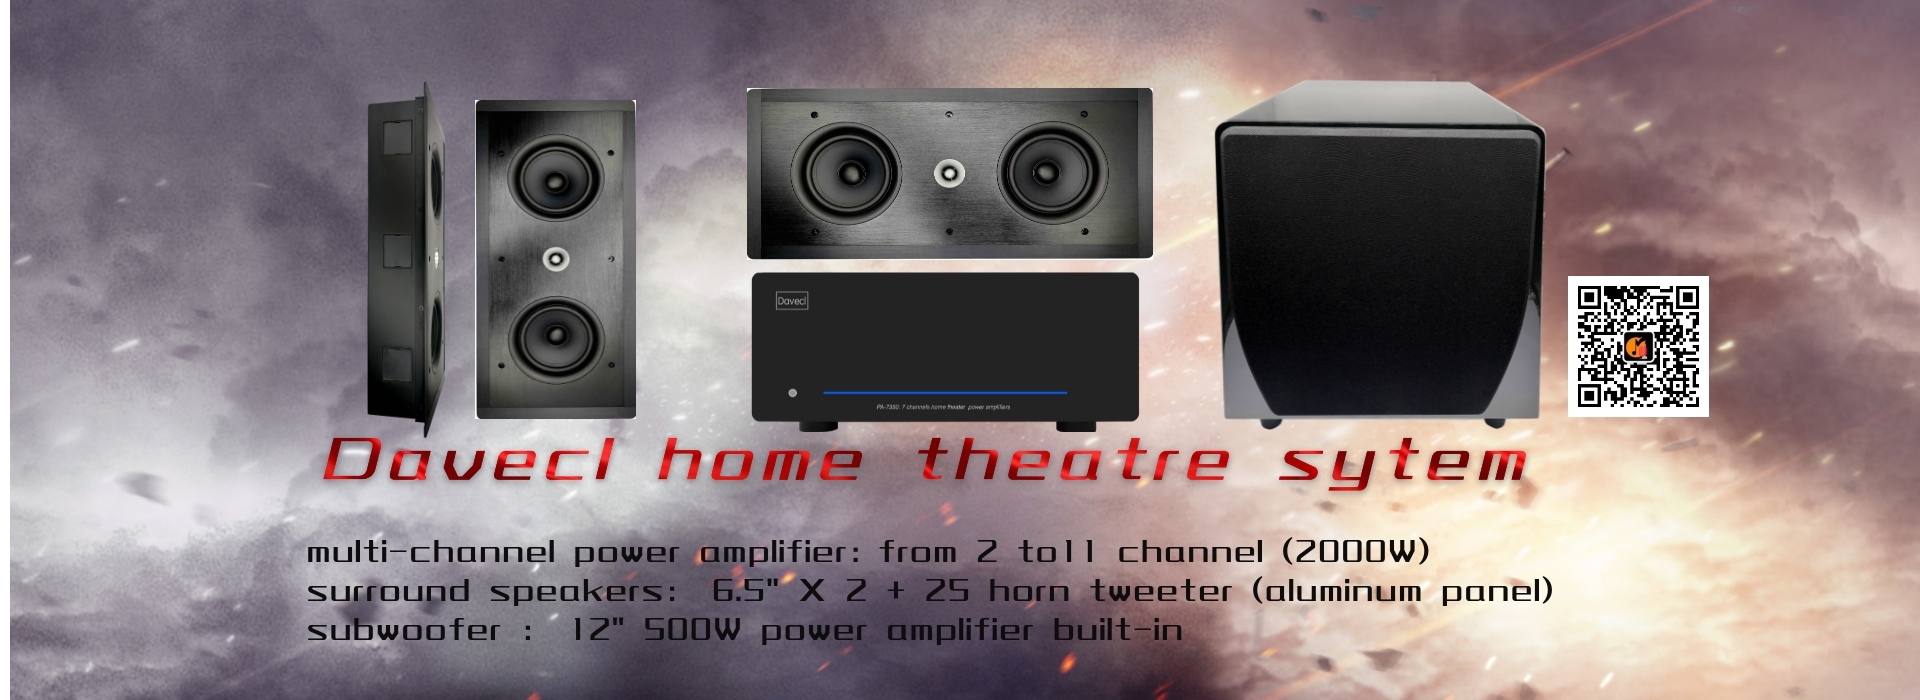 Davecl home theater system hifi